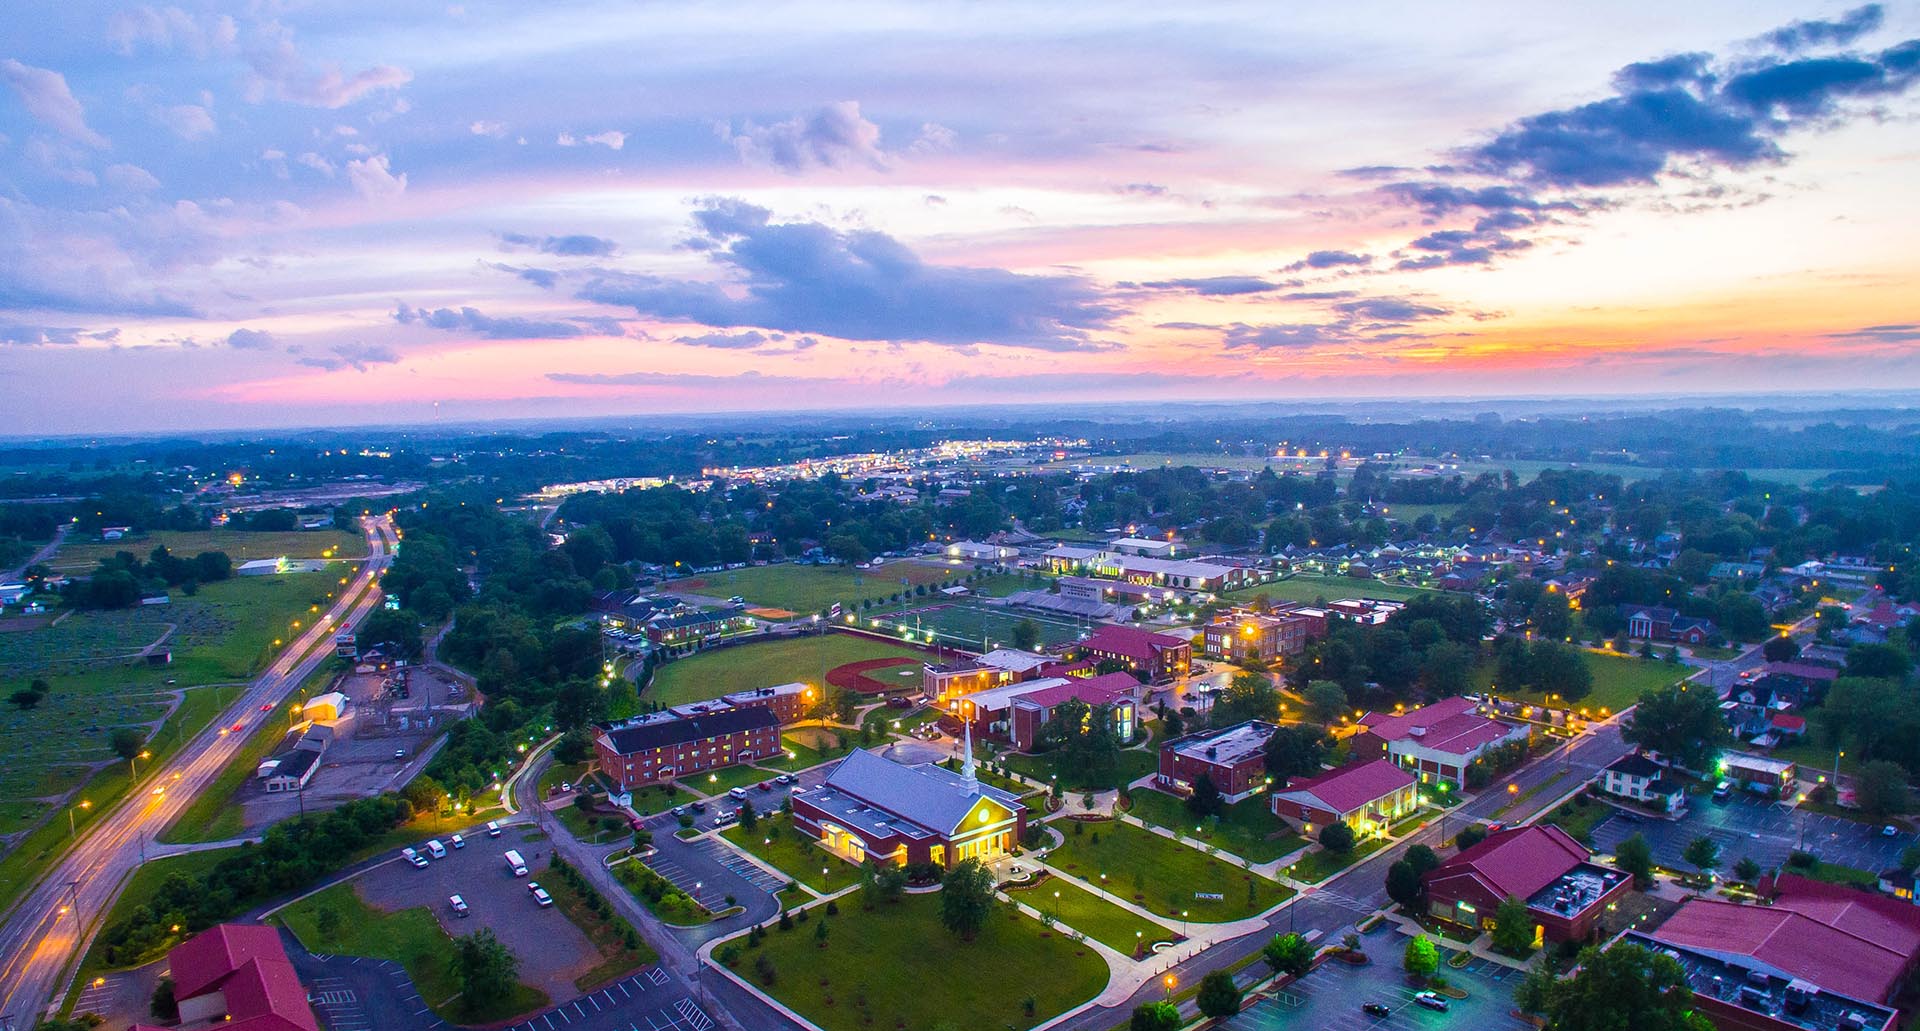 Top 10 Residences at Campbellsville University